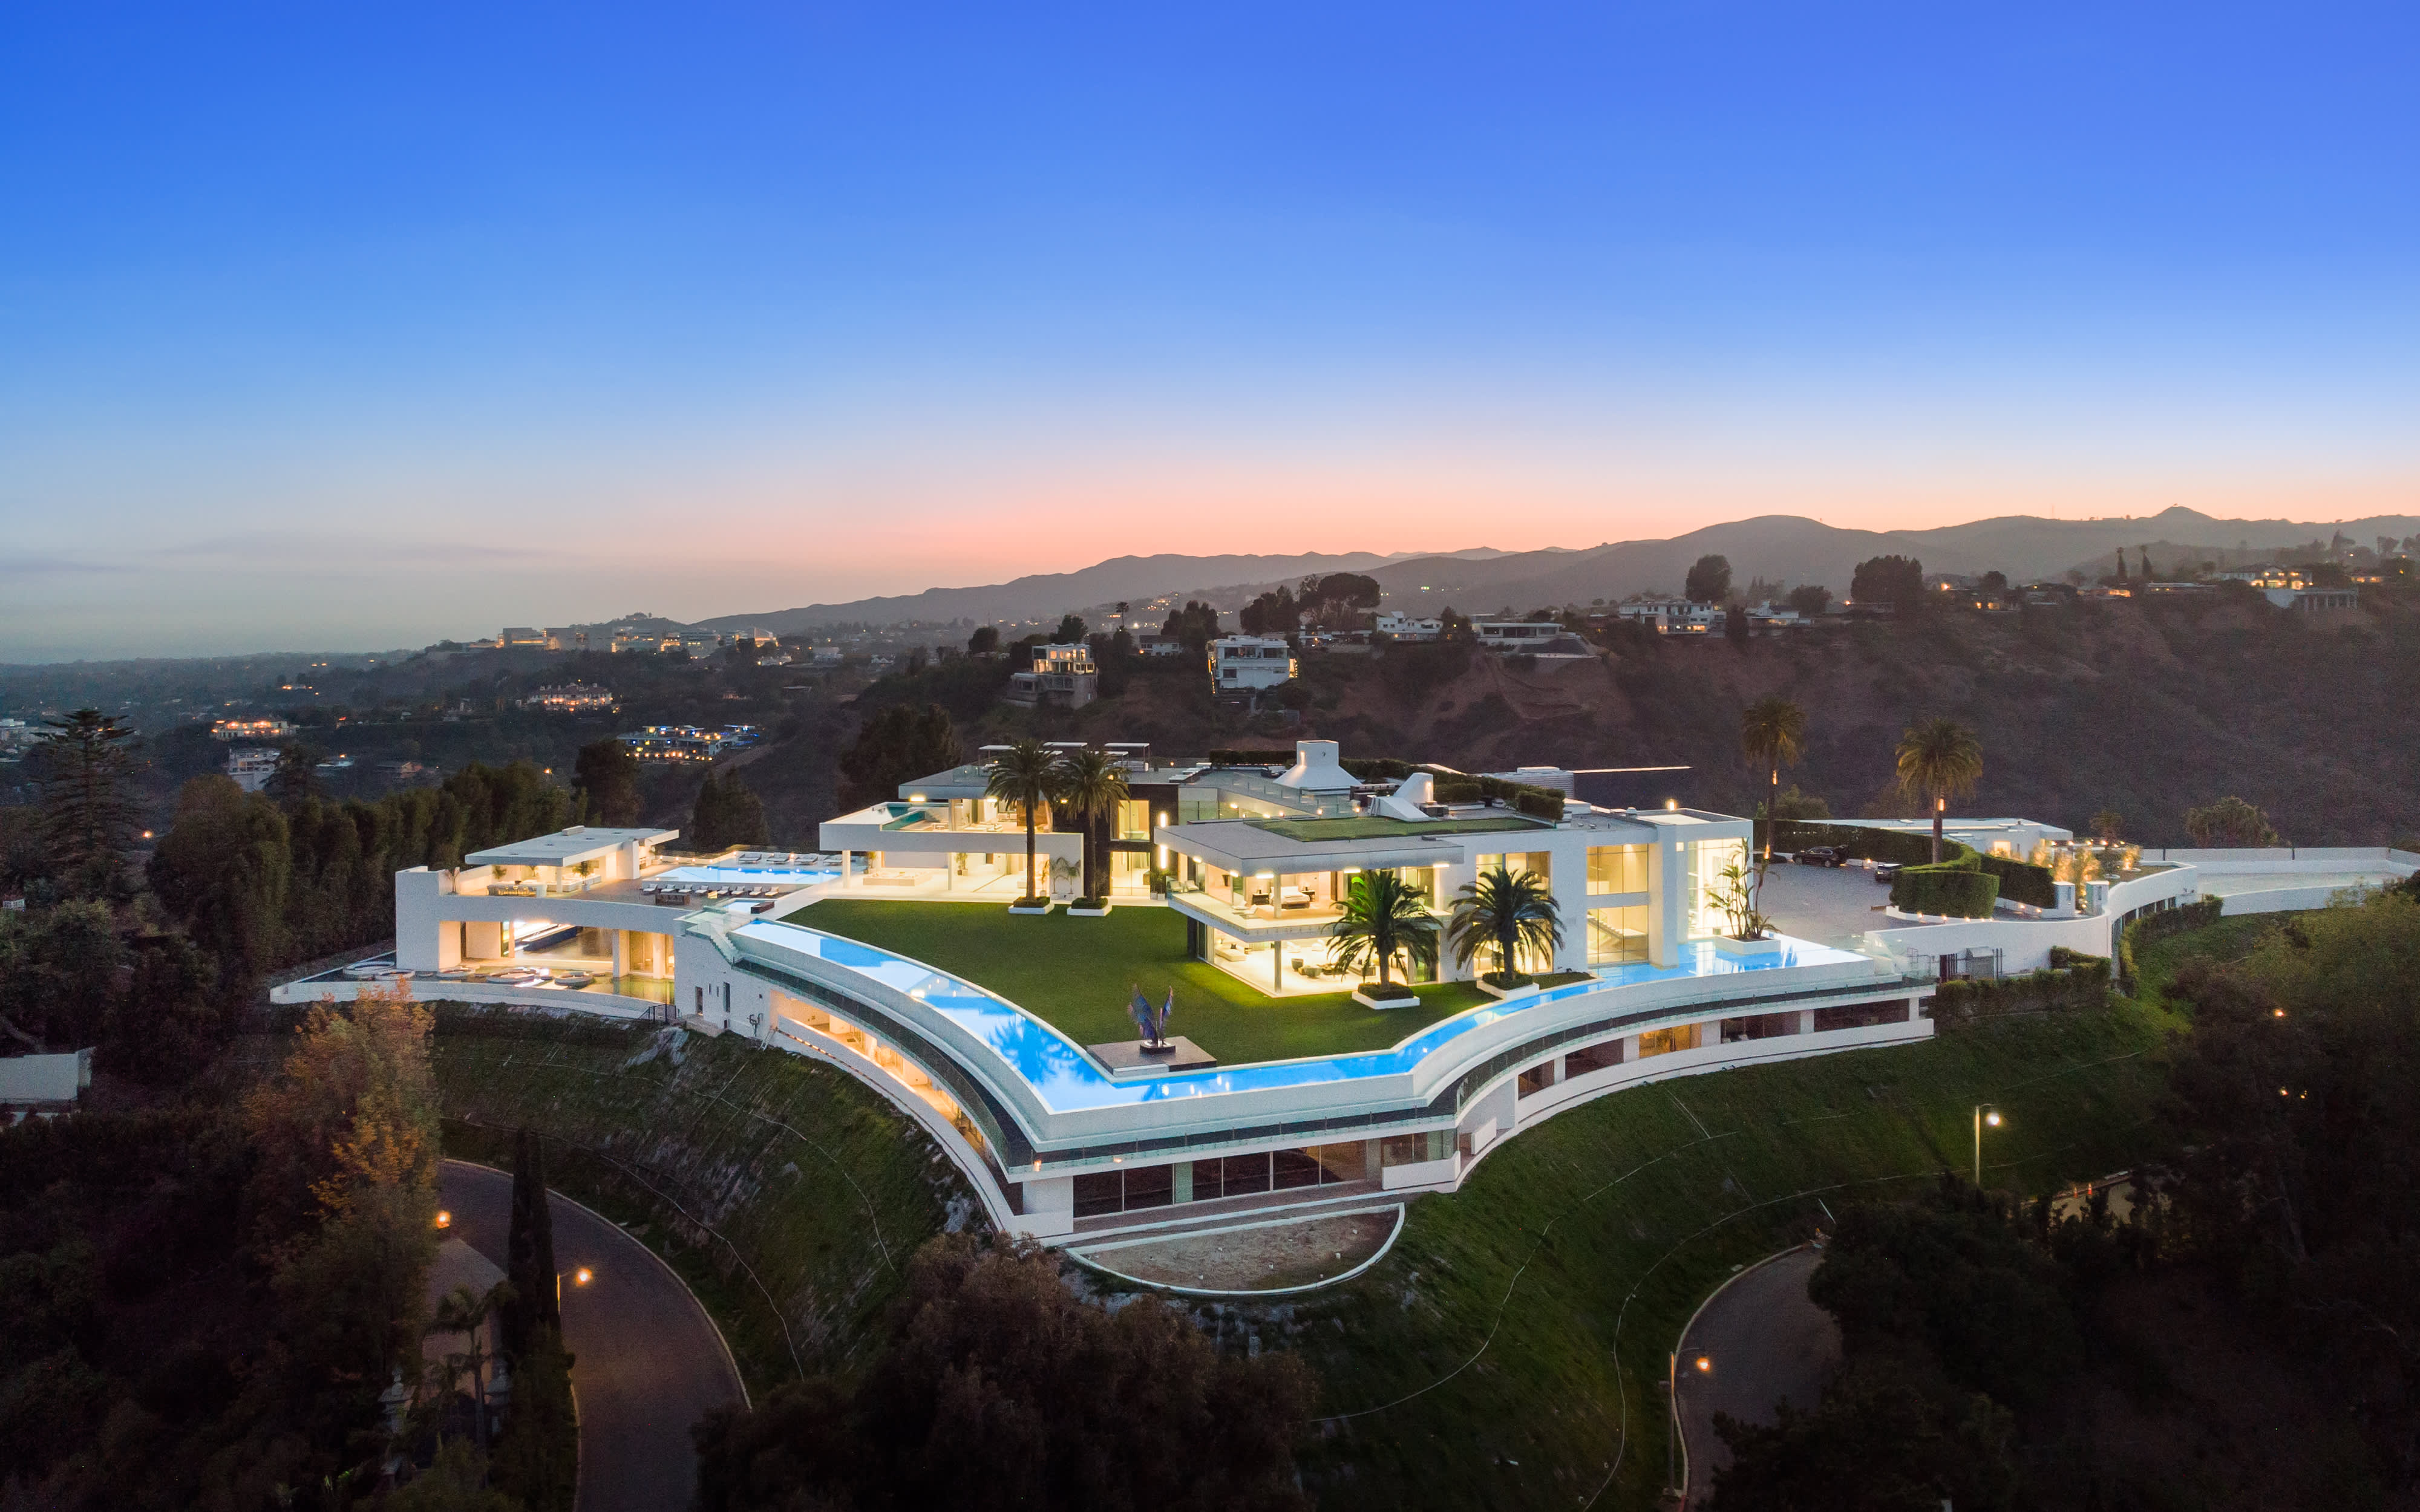 Most expensive home in America lists for $295 million may head to auction – CNBC